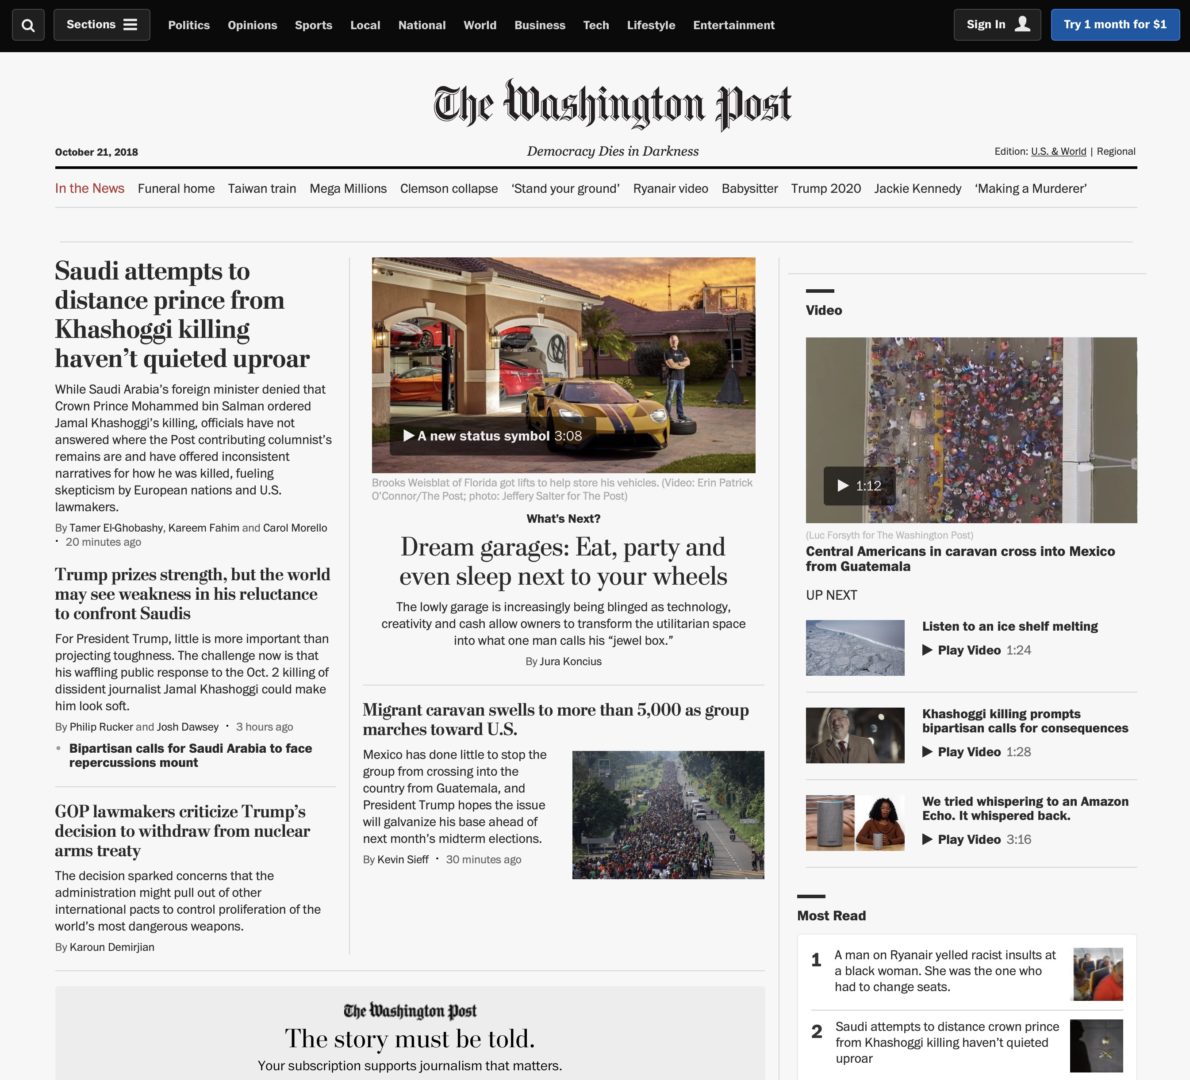 ford-gt-front-page-washington-post-brooks-weisblat-1190x1080.jpg